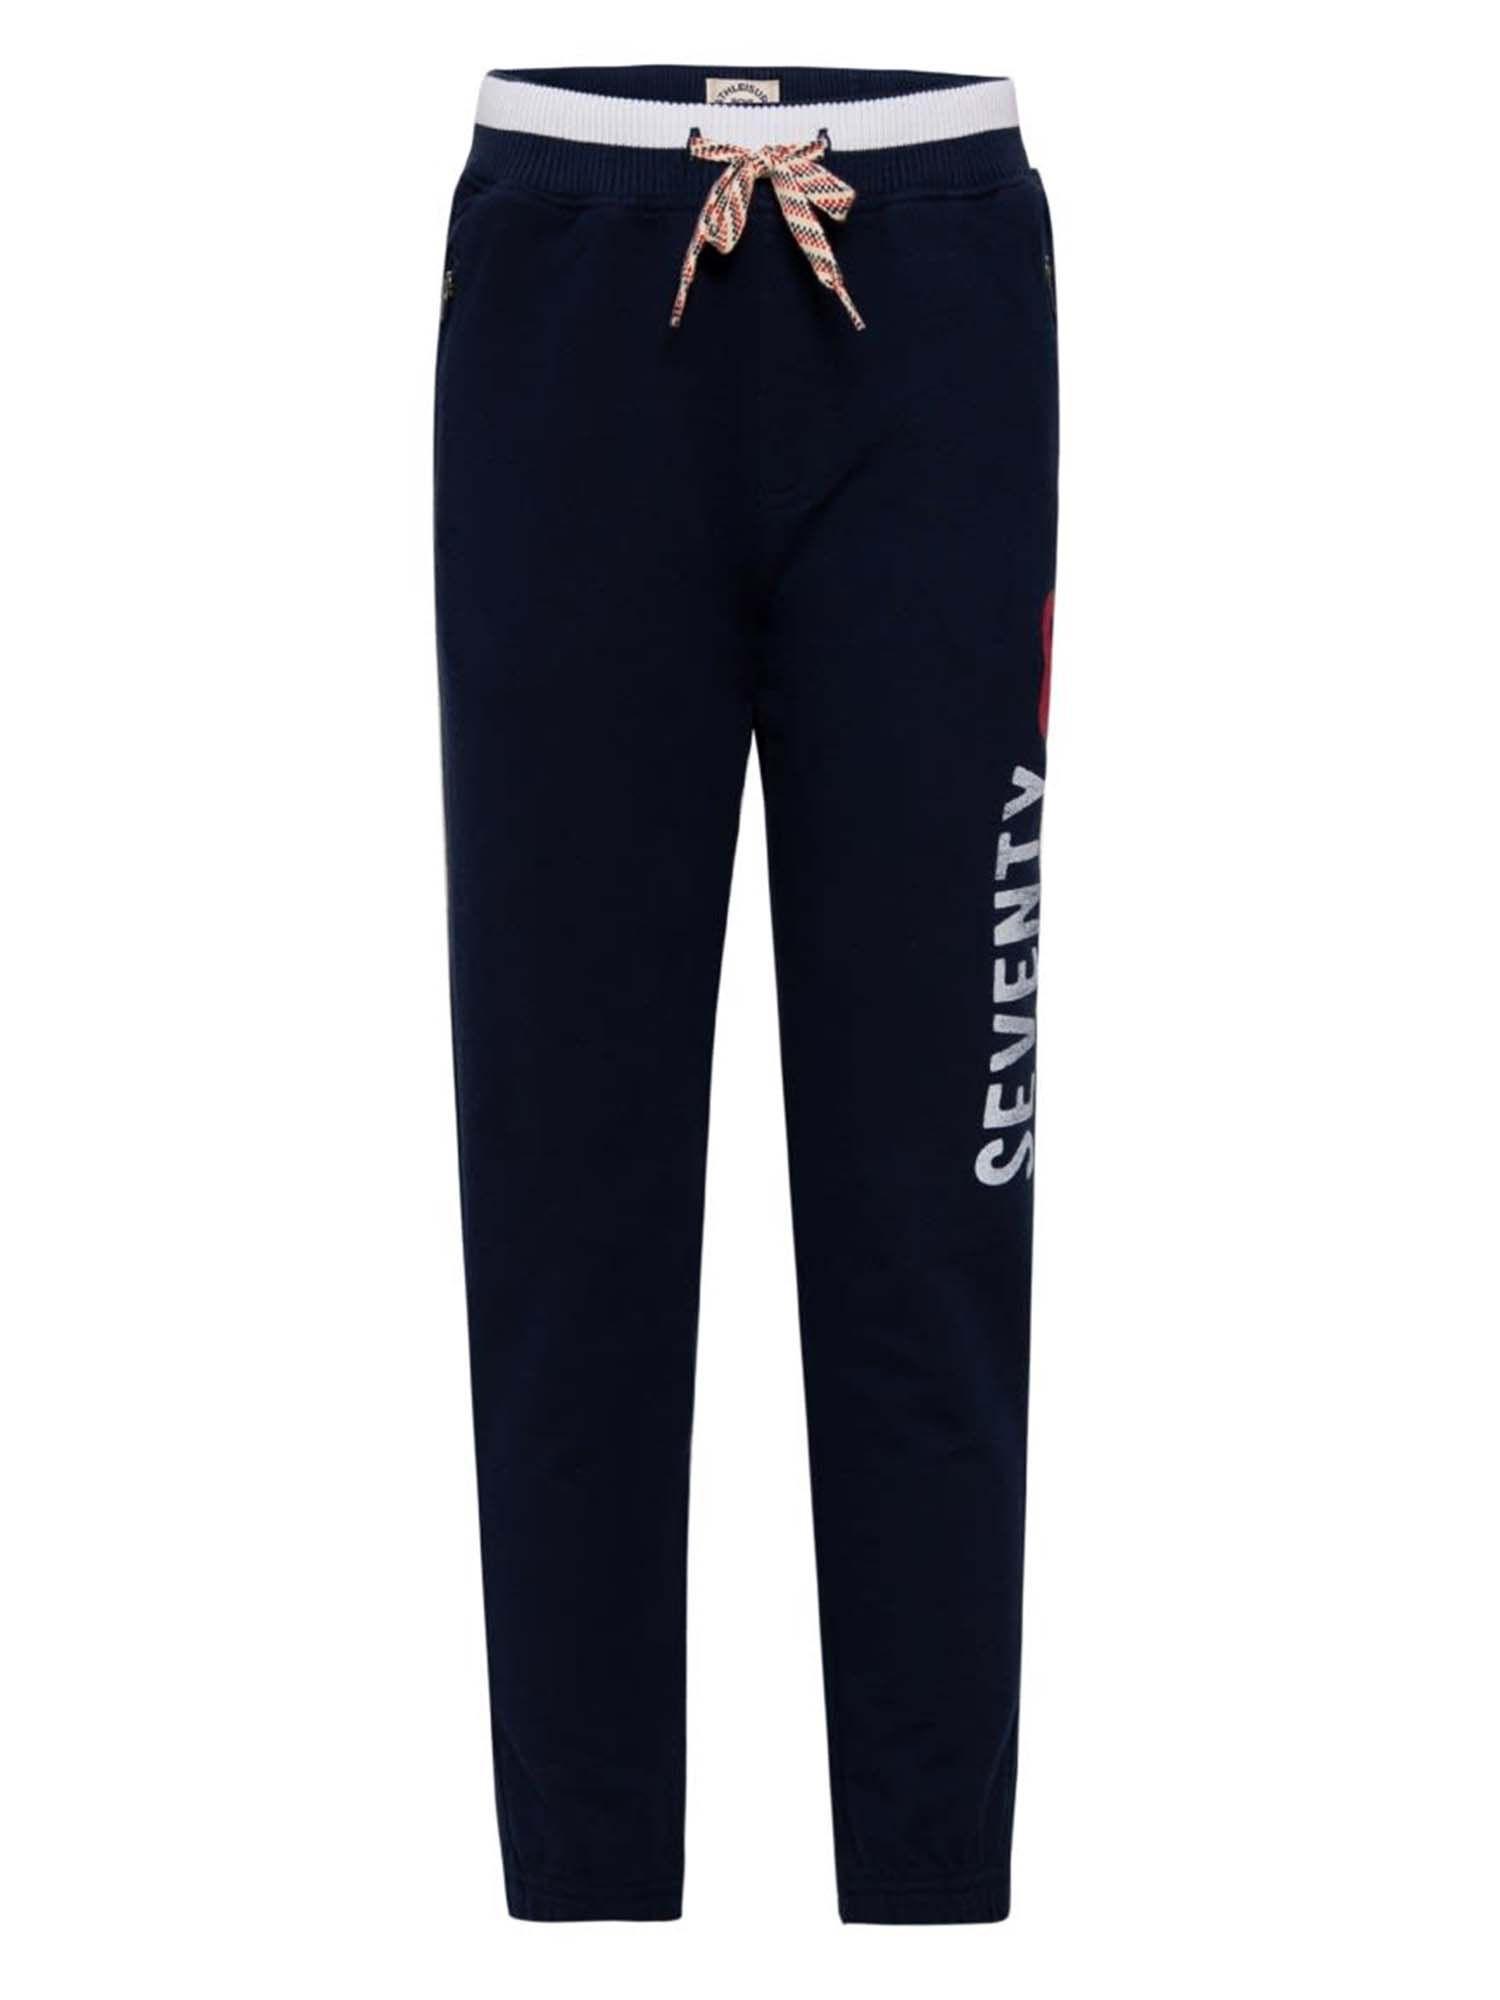 navy jogger - style number - (ab21)